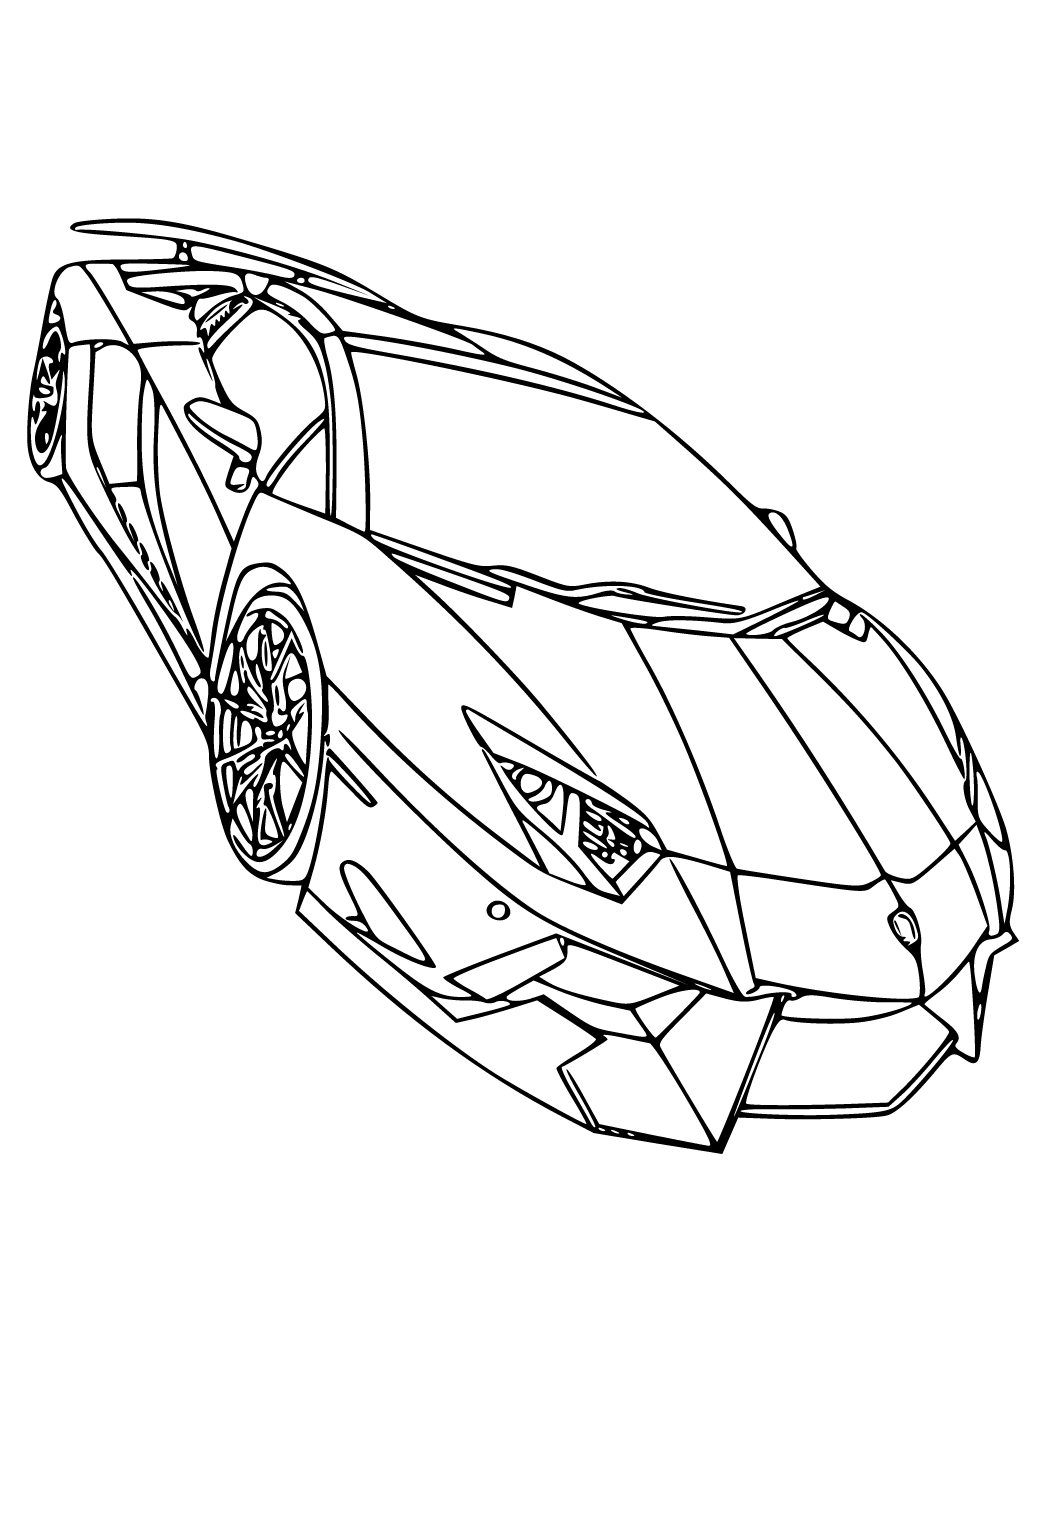 Free printable lamborghini style coloring page for adults and kids